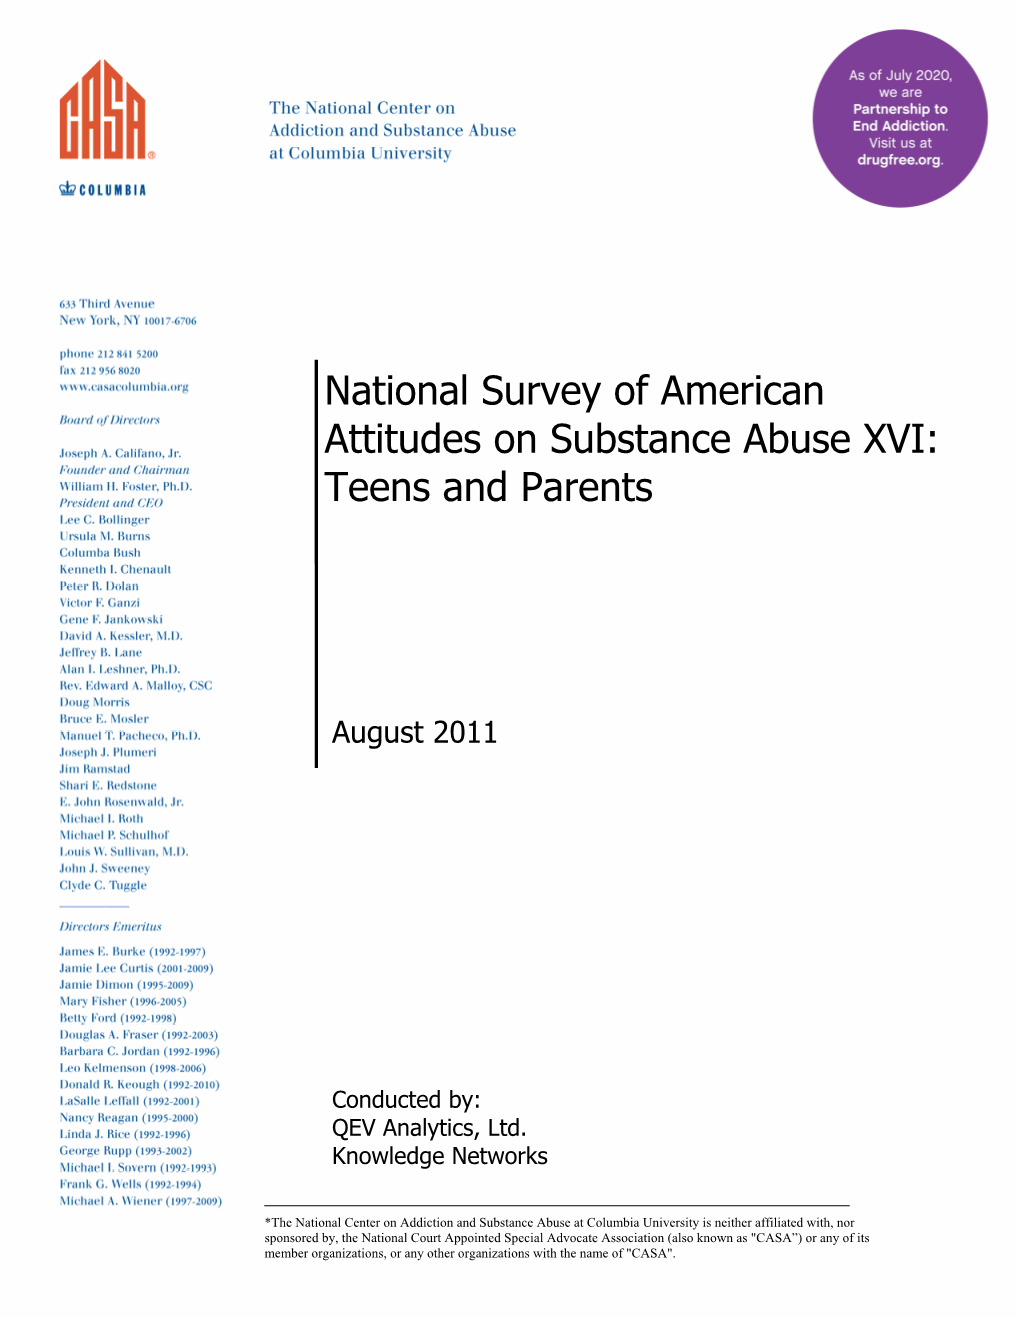 National Survey of American Attitudes on Substance Abuse XVI: Teens and Parents